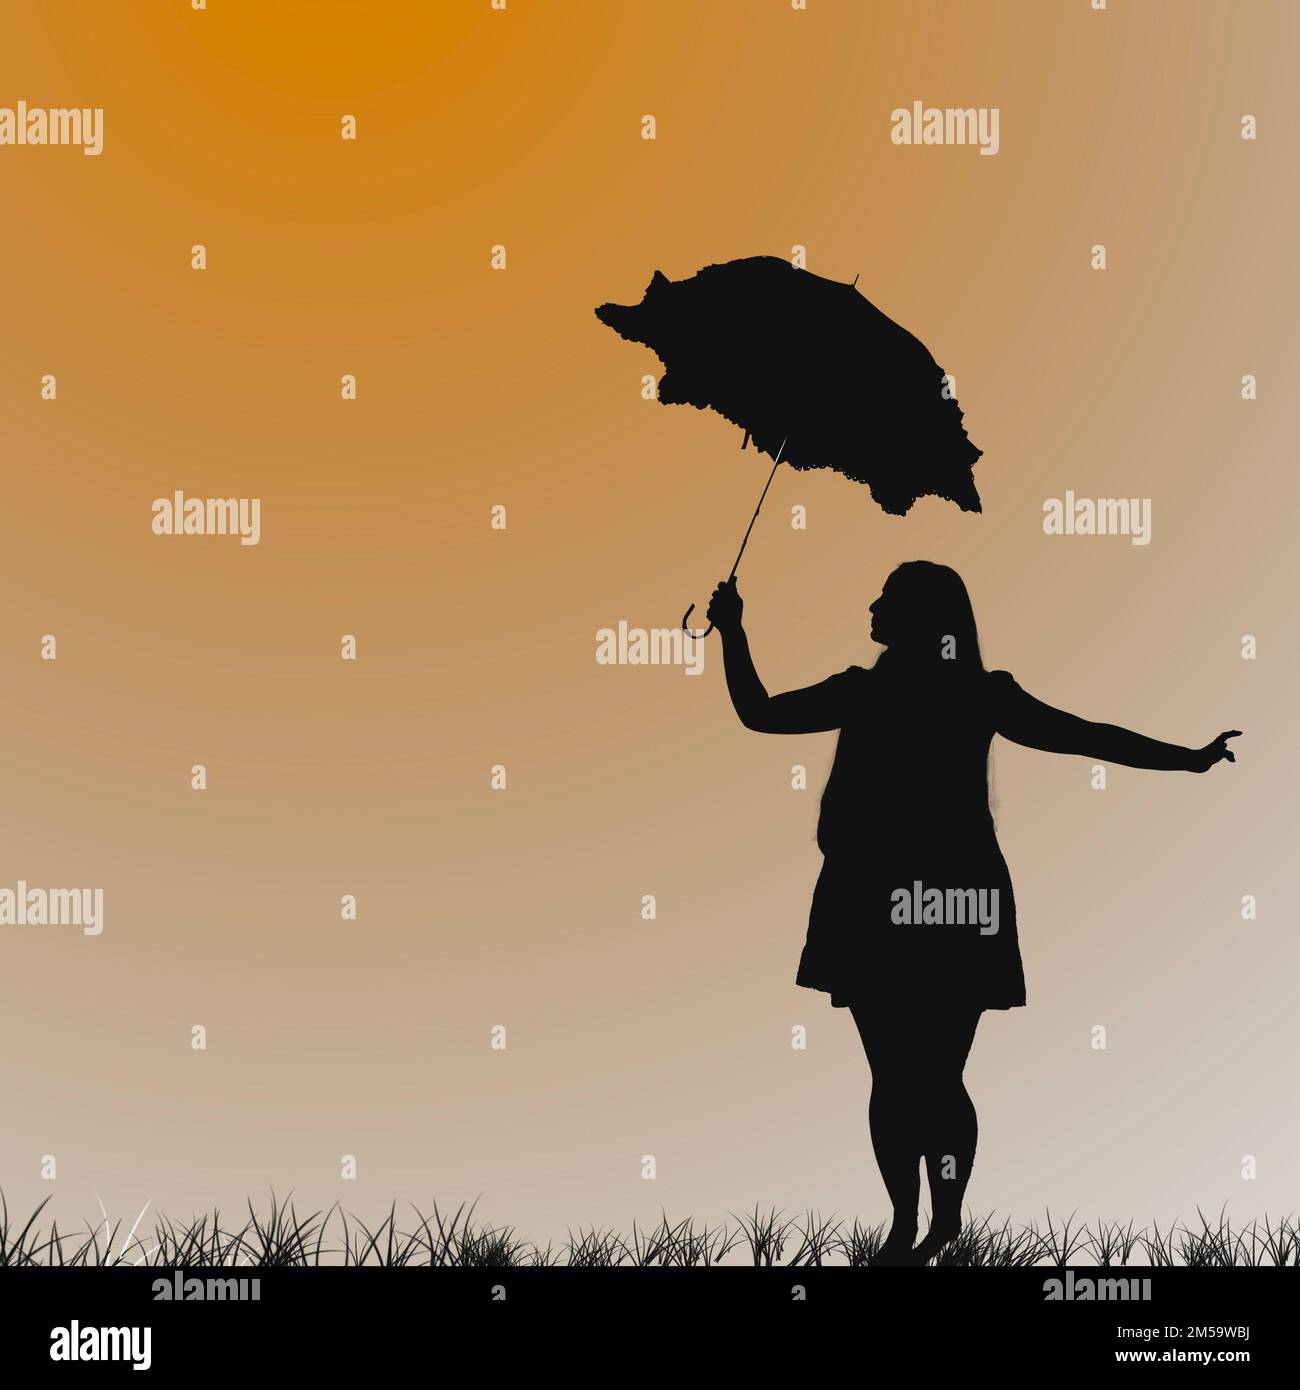 Girl standing with parasol in right hand facing her right silhouetted against orange background standing in black & white grass Stock Photo